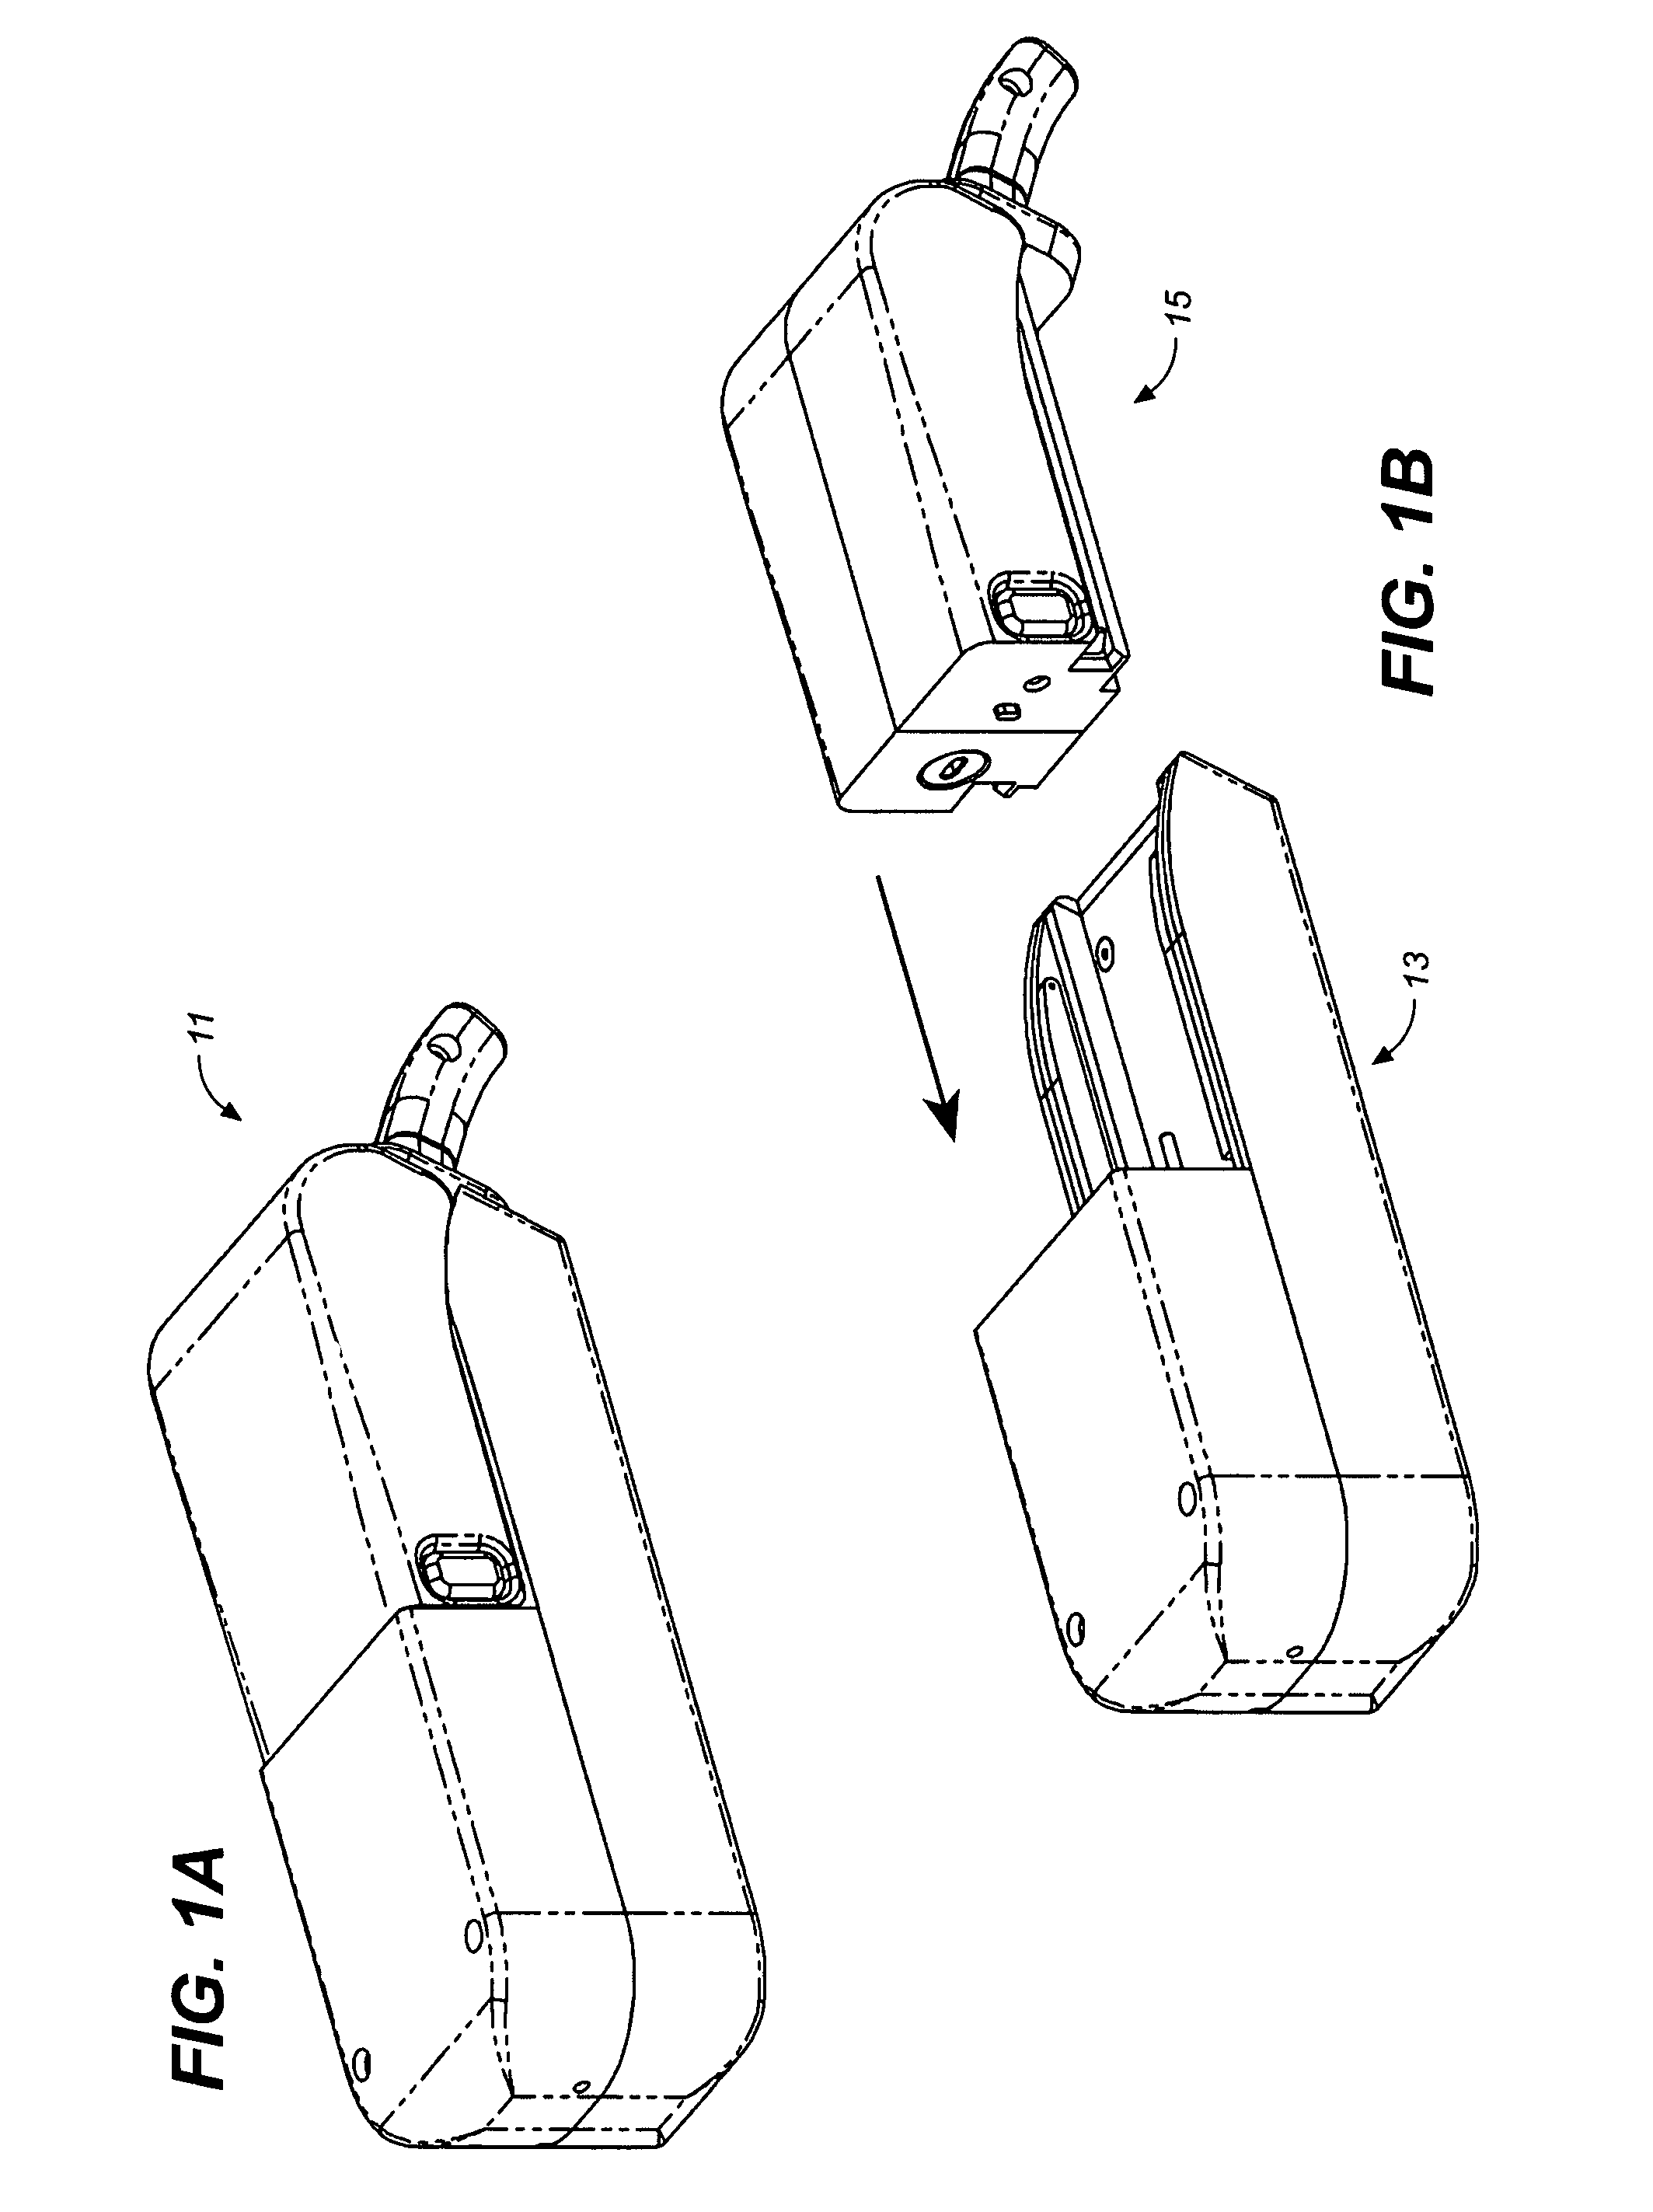 Methods for administering small volume oral transmucosal dosage forms using a dispensing device